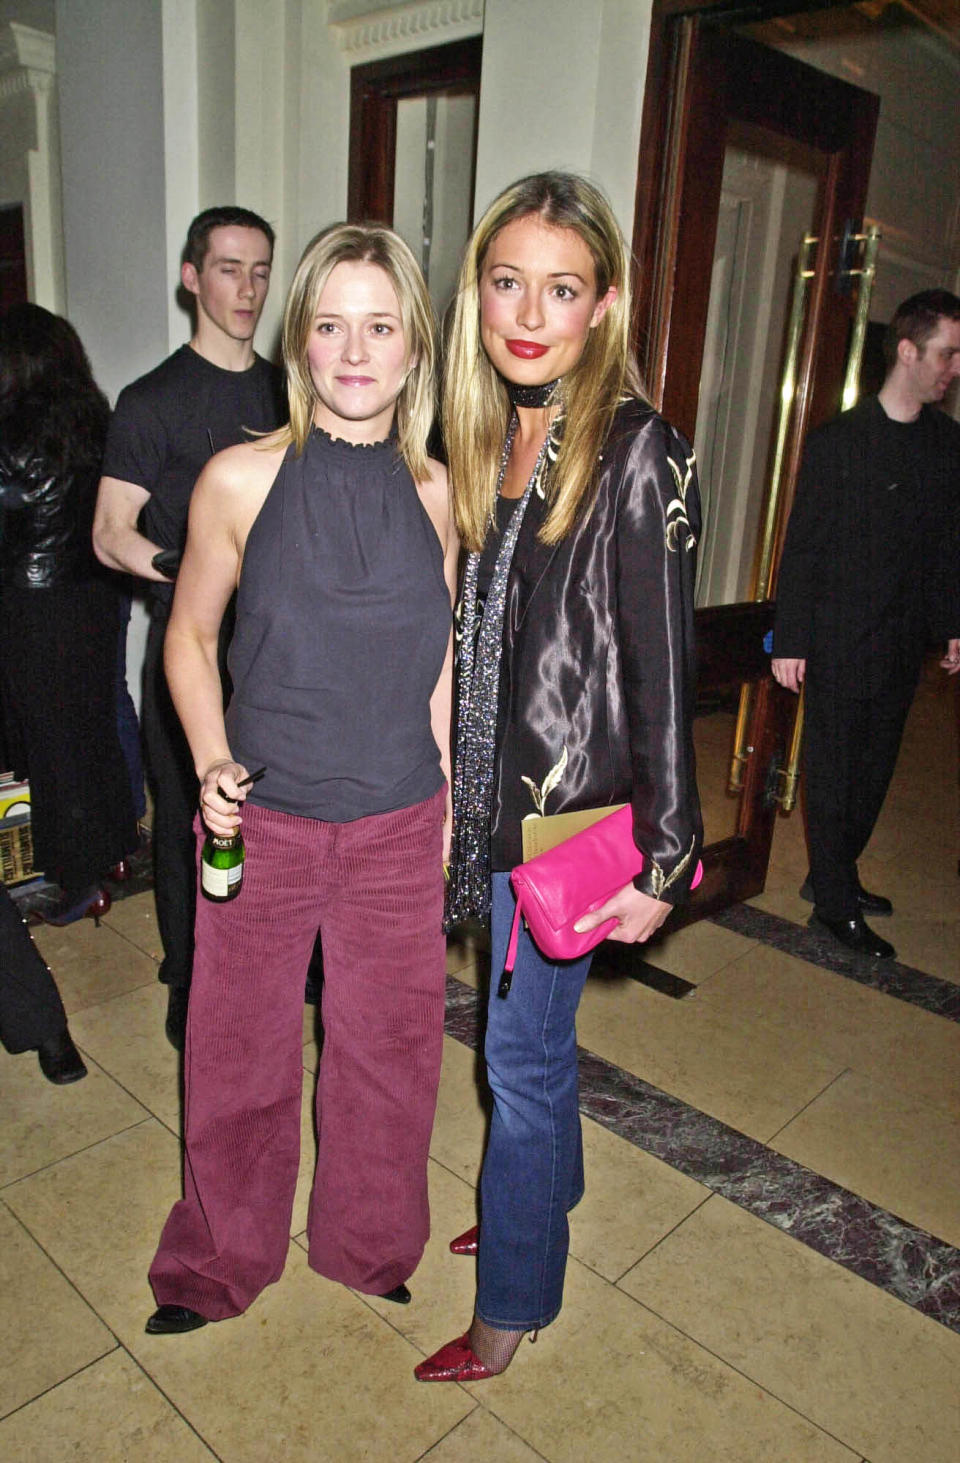 LONDON - MARCH 29:  Edith Bowman and Cat Deeley attend the Harvey Nichols' Launch Party for 